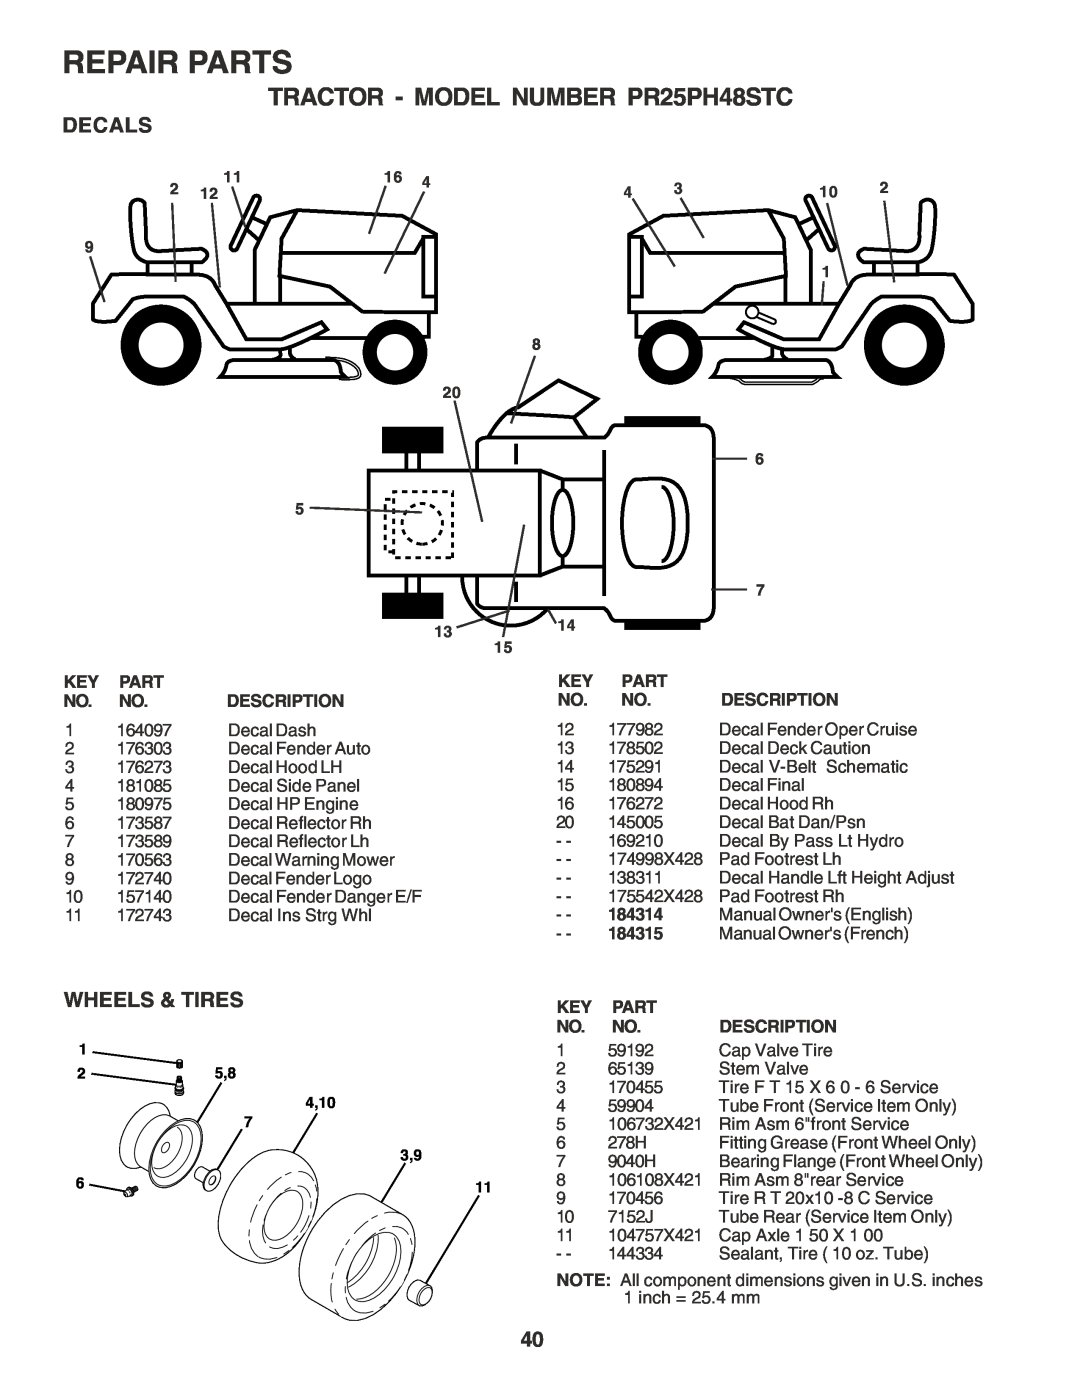 Poulan owner manual Decals, Wheels & Tires, Repair Parts, TRACTOR - MODEL NUMBER PR25PH48STC, 4,10 